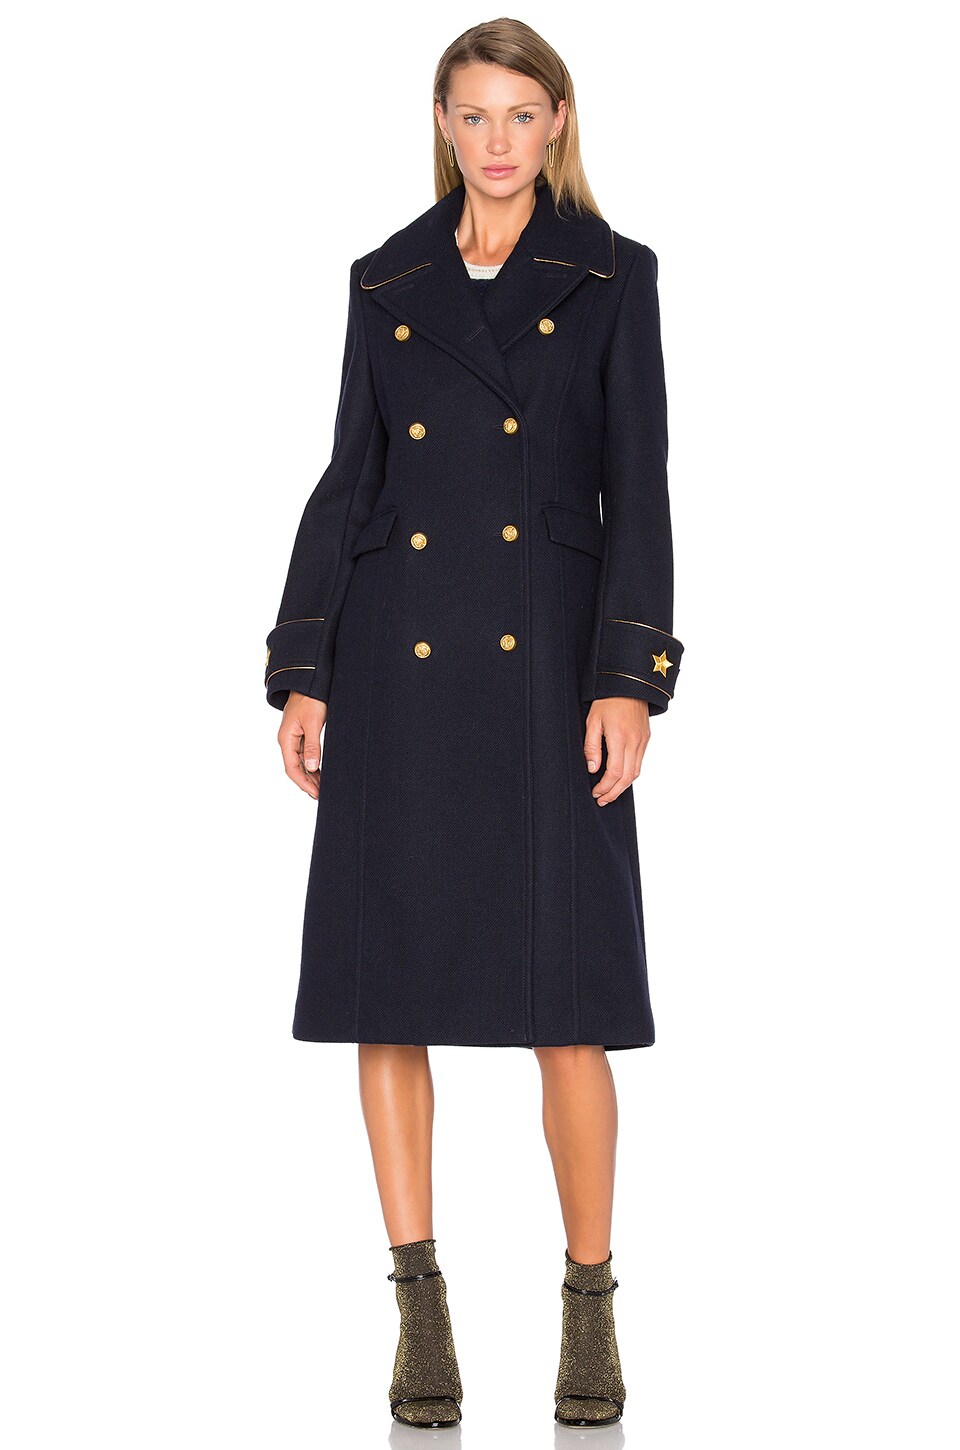 Hilfiger Collection Long Military Coat in Navy Blazer | REVOLVE